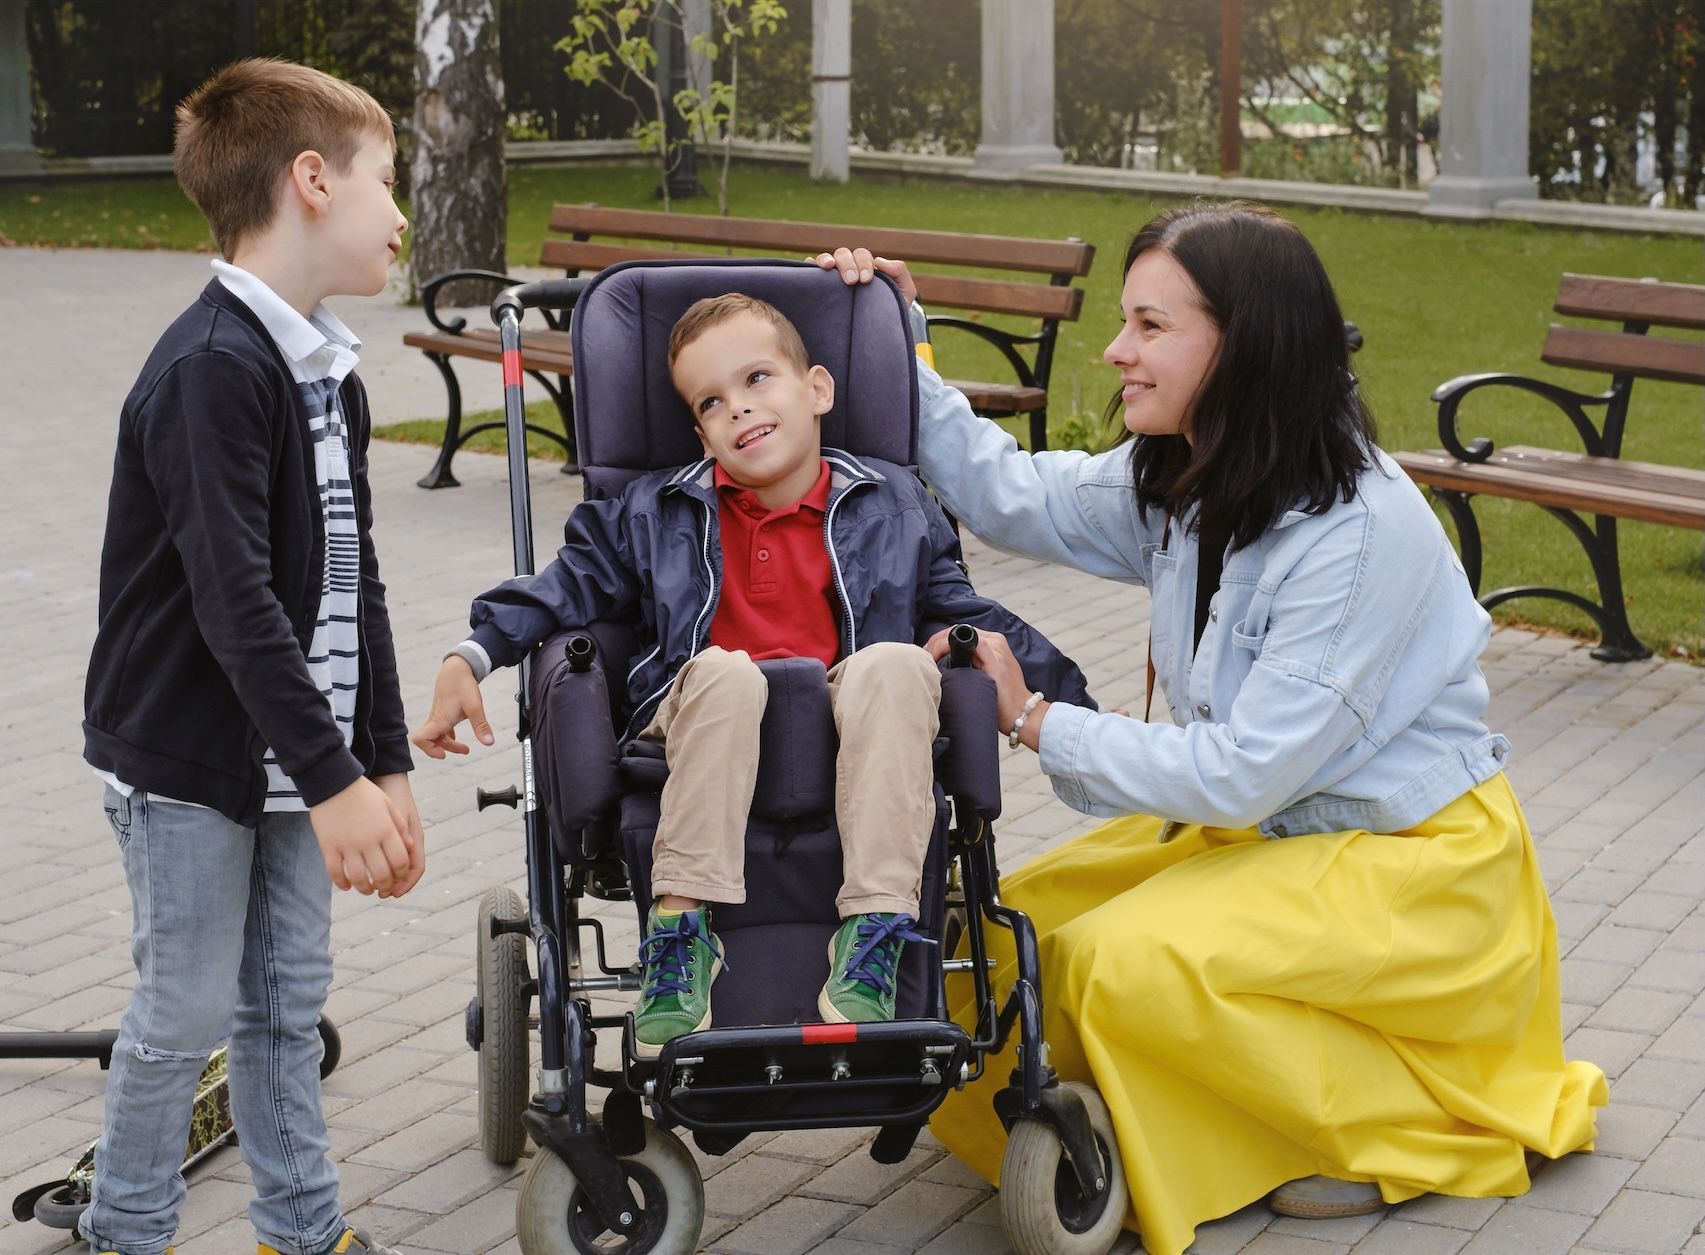 Boy with cerebral palsy in a wheelchair communicating with his mother and brother